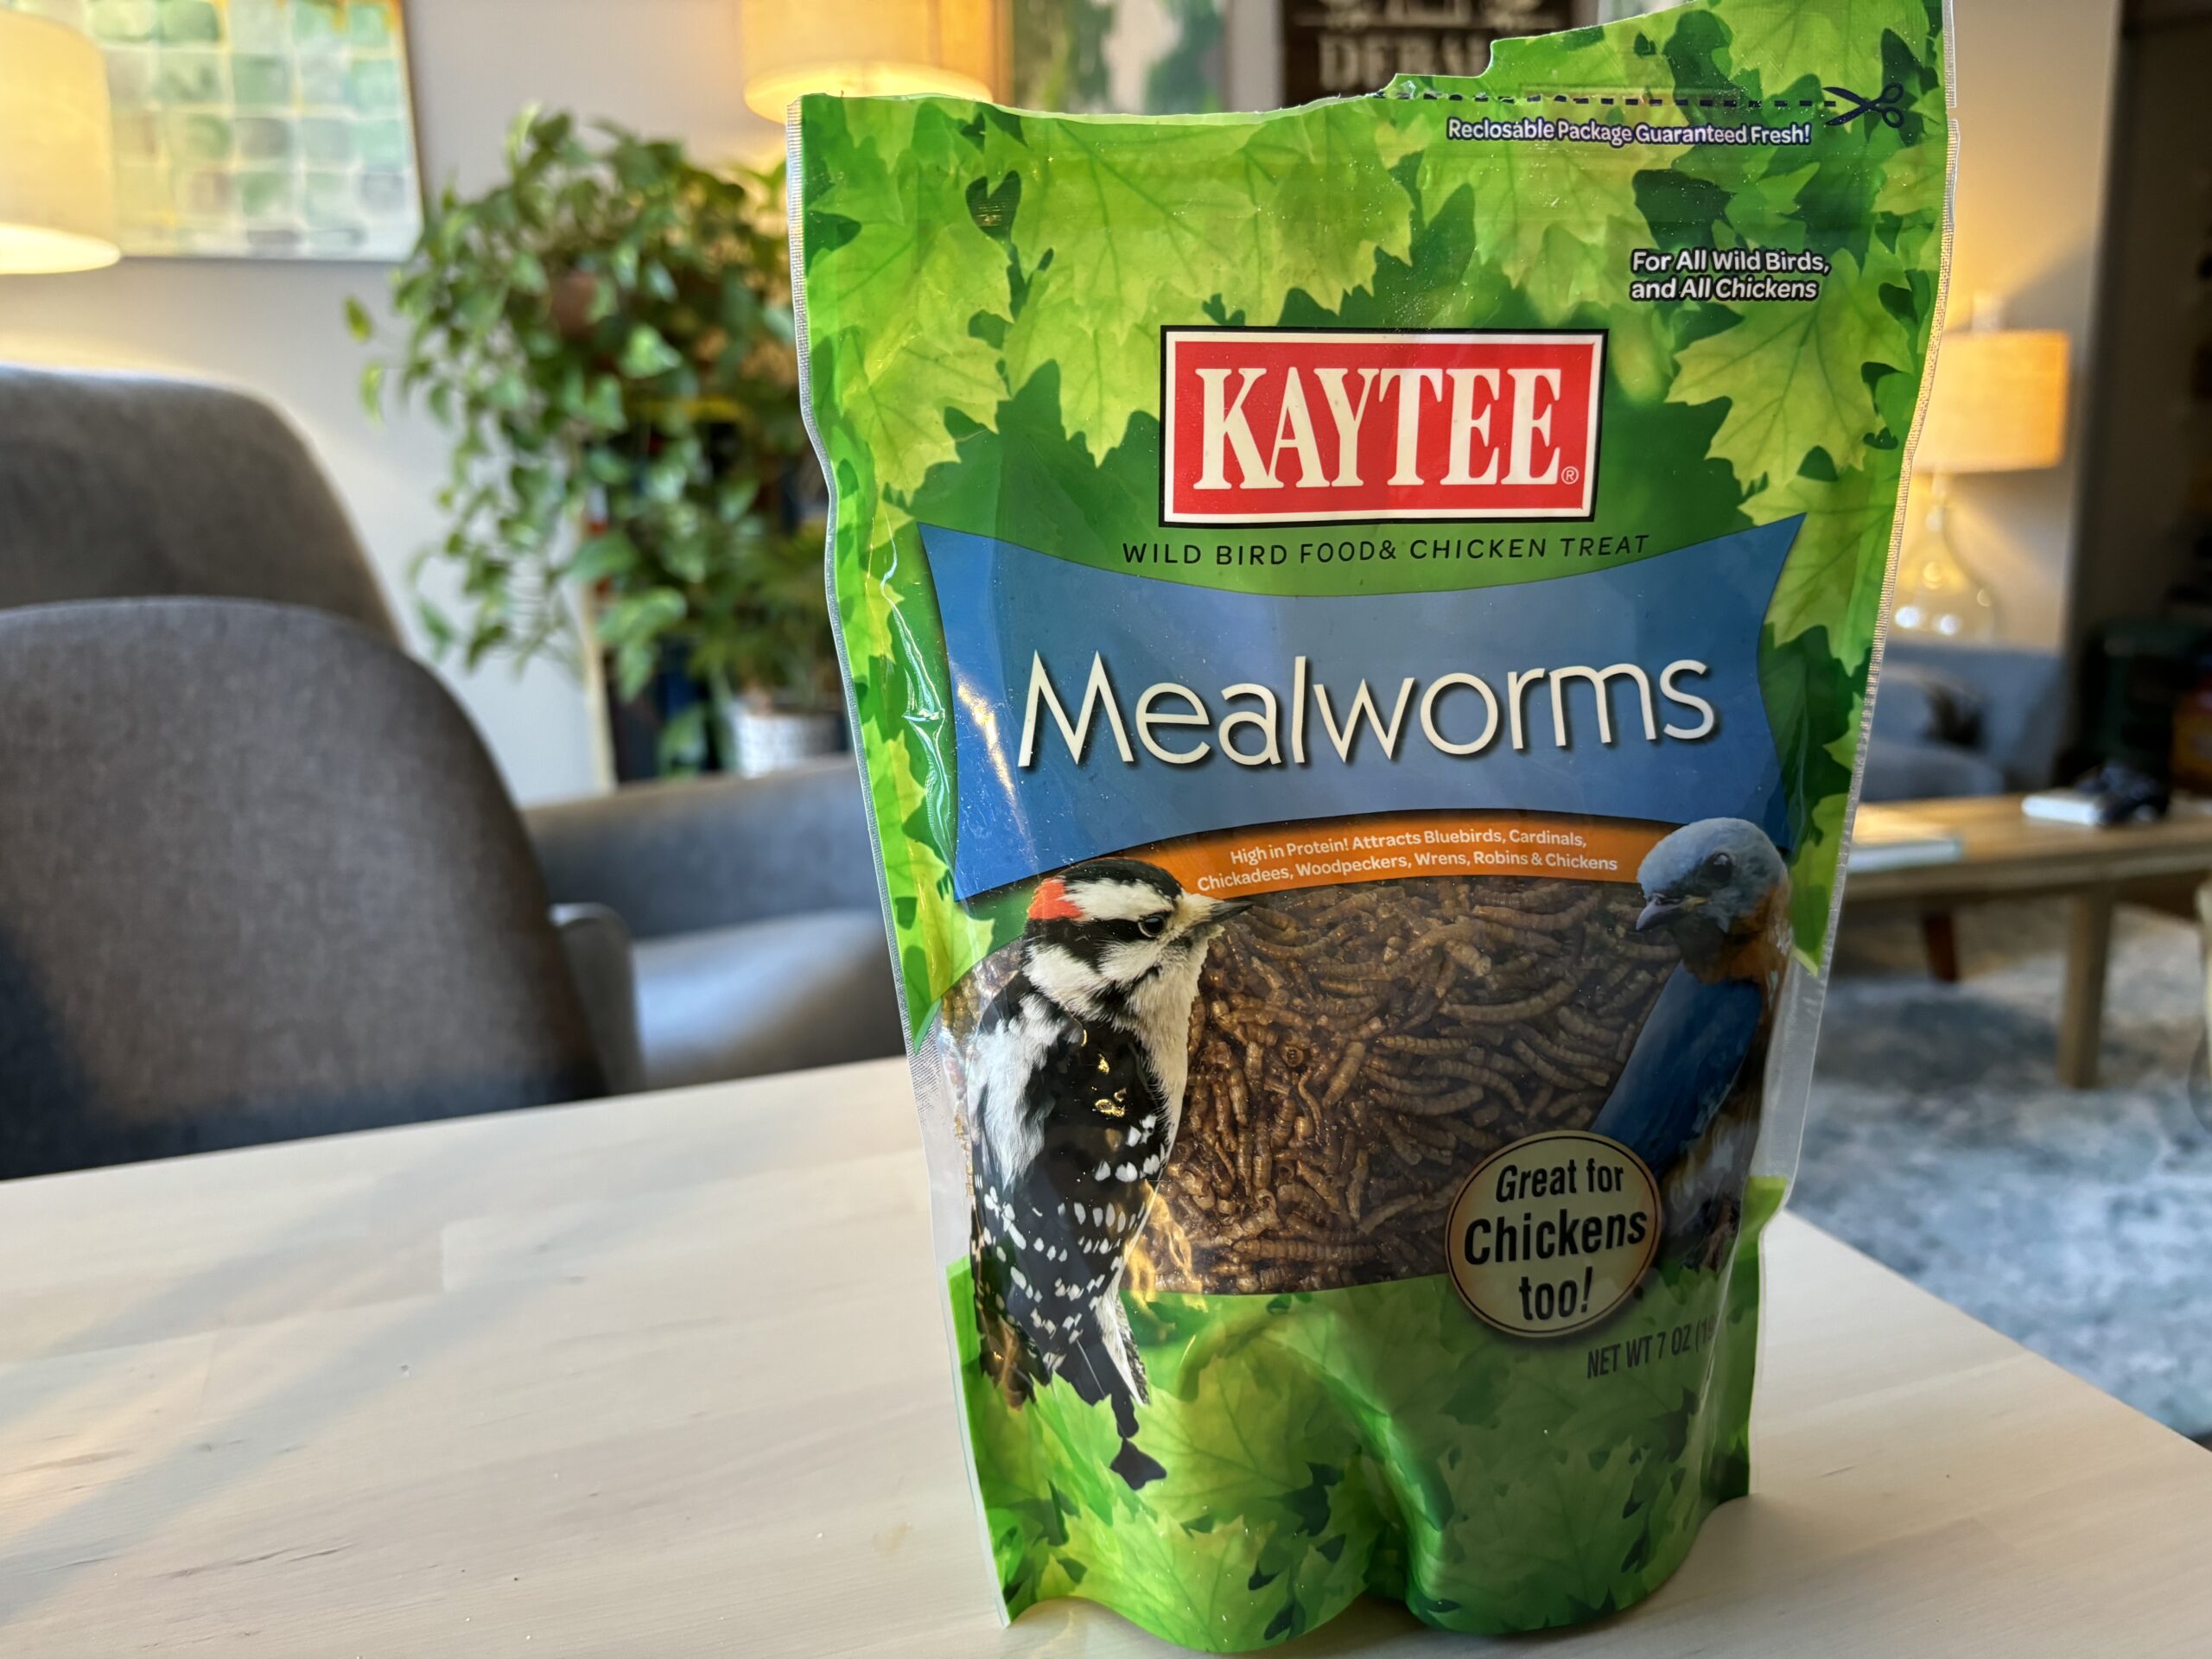 Review: Kaytee Mealworms are Fantastic for Bird Feeding